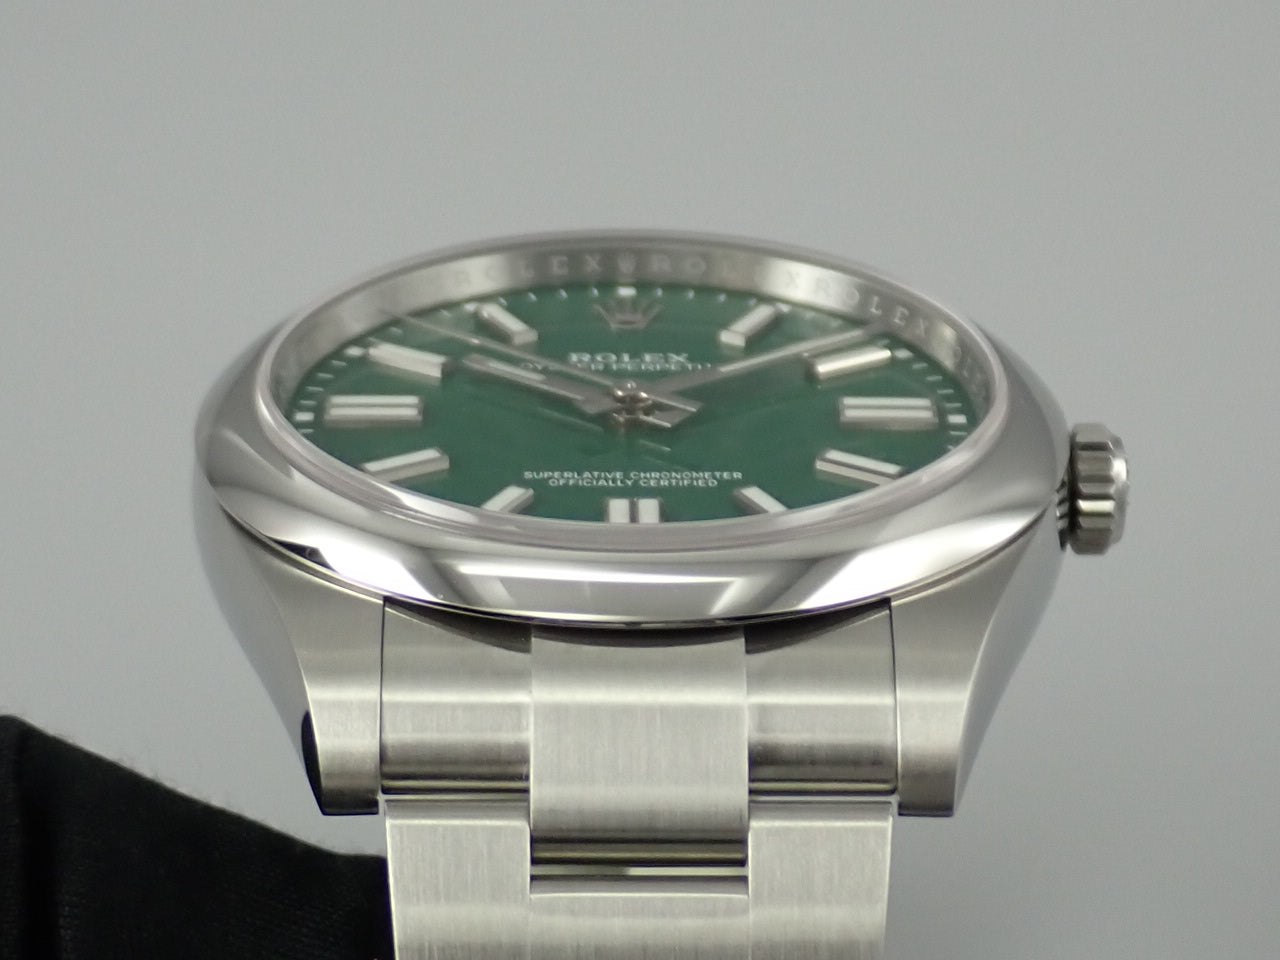 Rolex New Oyster Perpetual 41 Green Dial [Good Condition] &lt;Warranty, Box, etc.&gt;